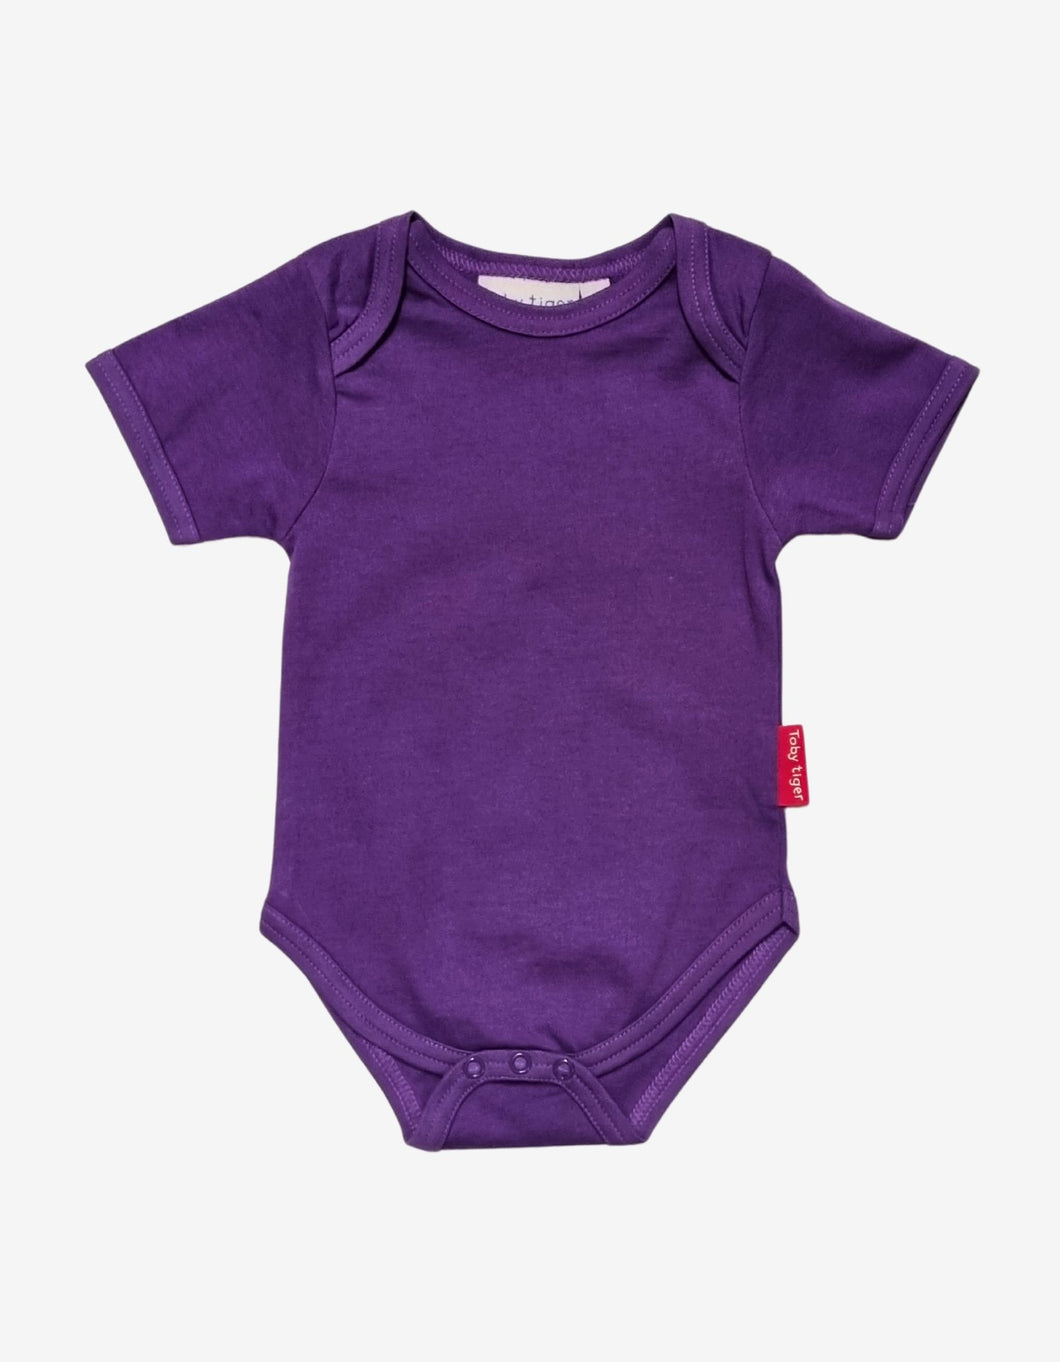 Baby body made of organic cotton in purple, plain colour